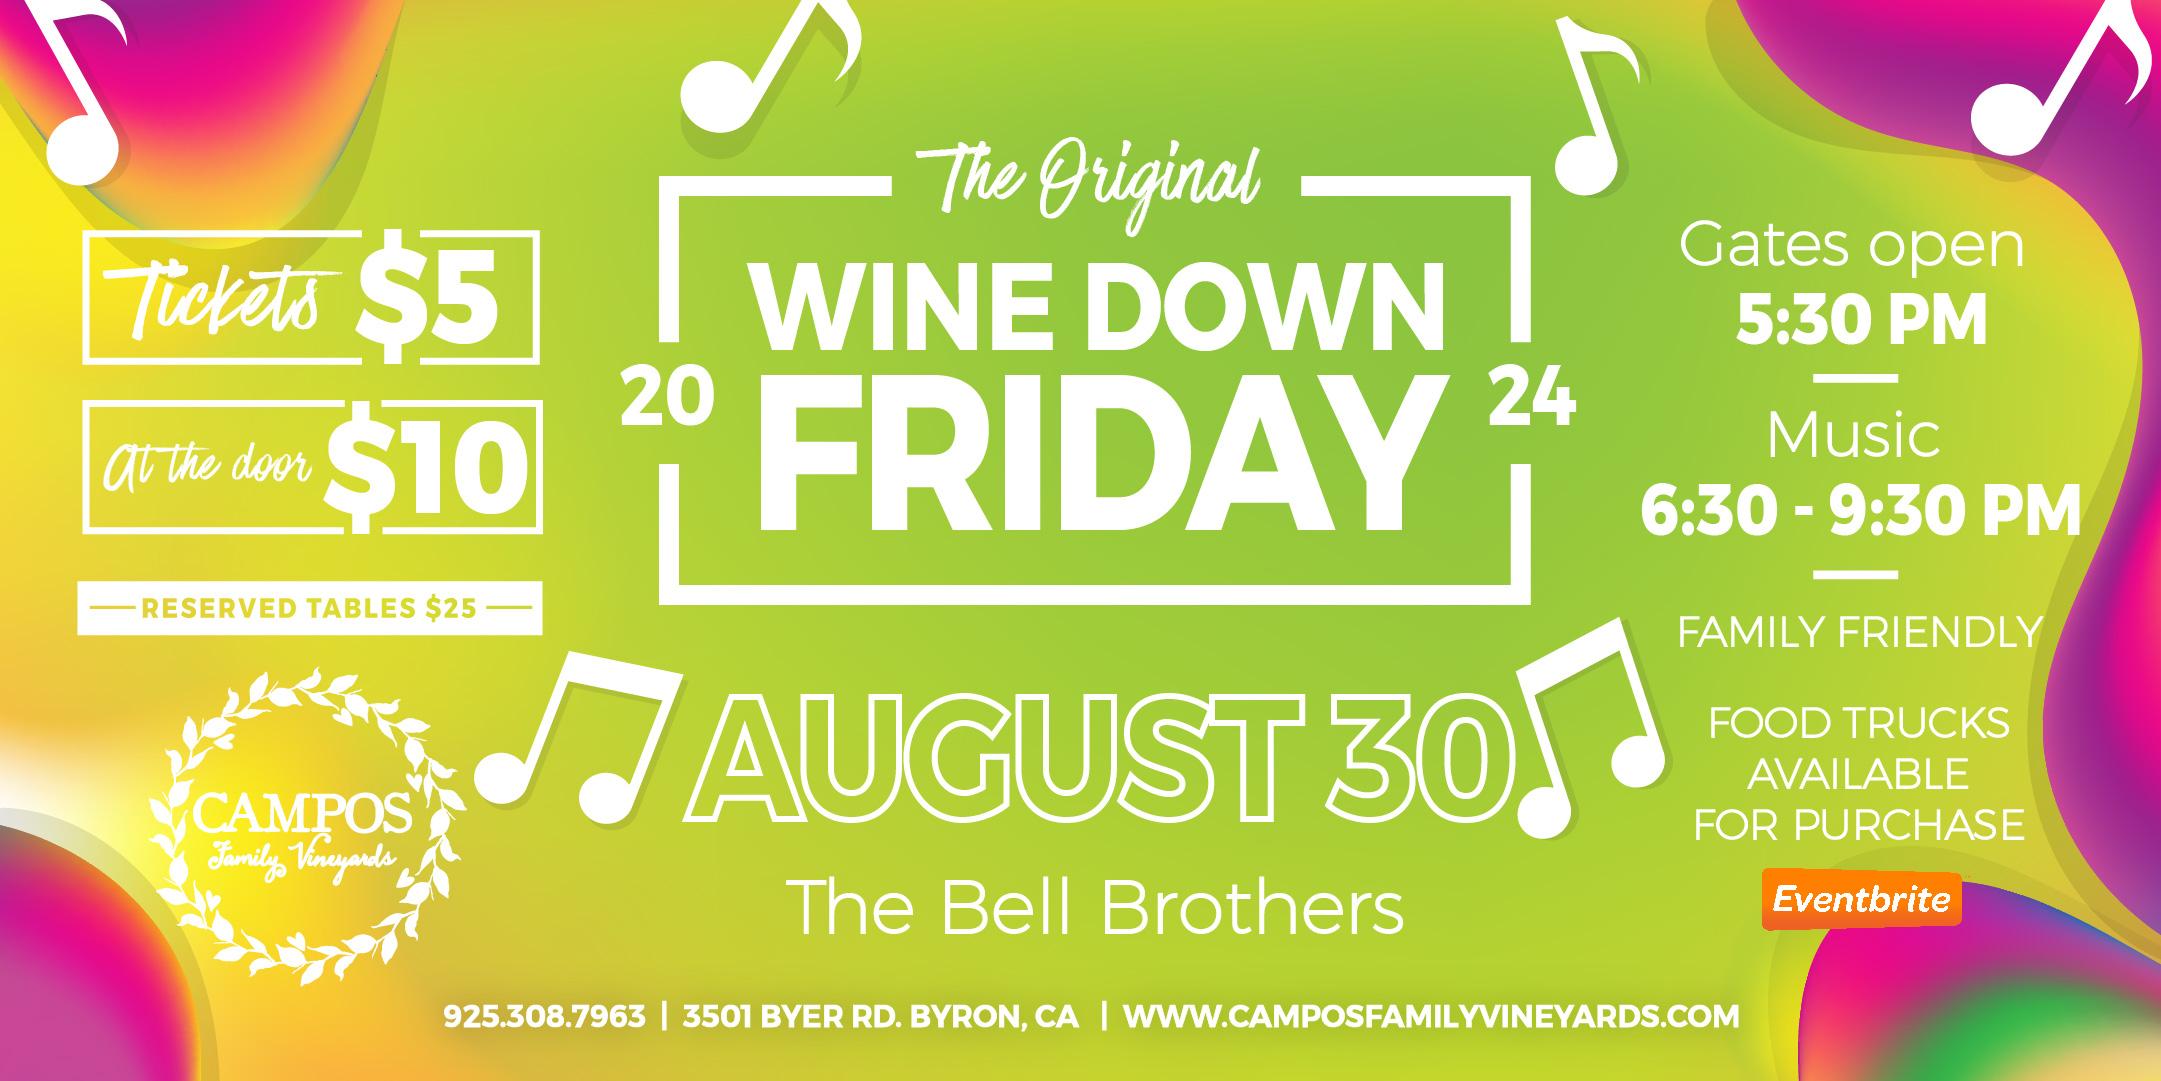 The Original Wine Down Friday - The Bell Brothers